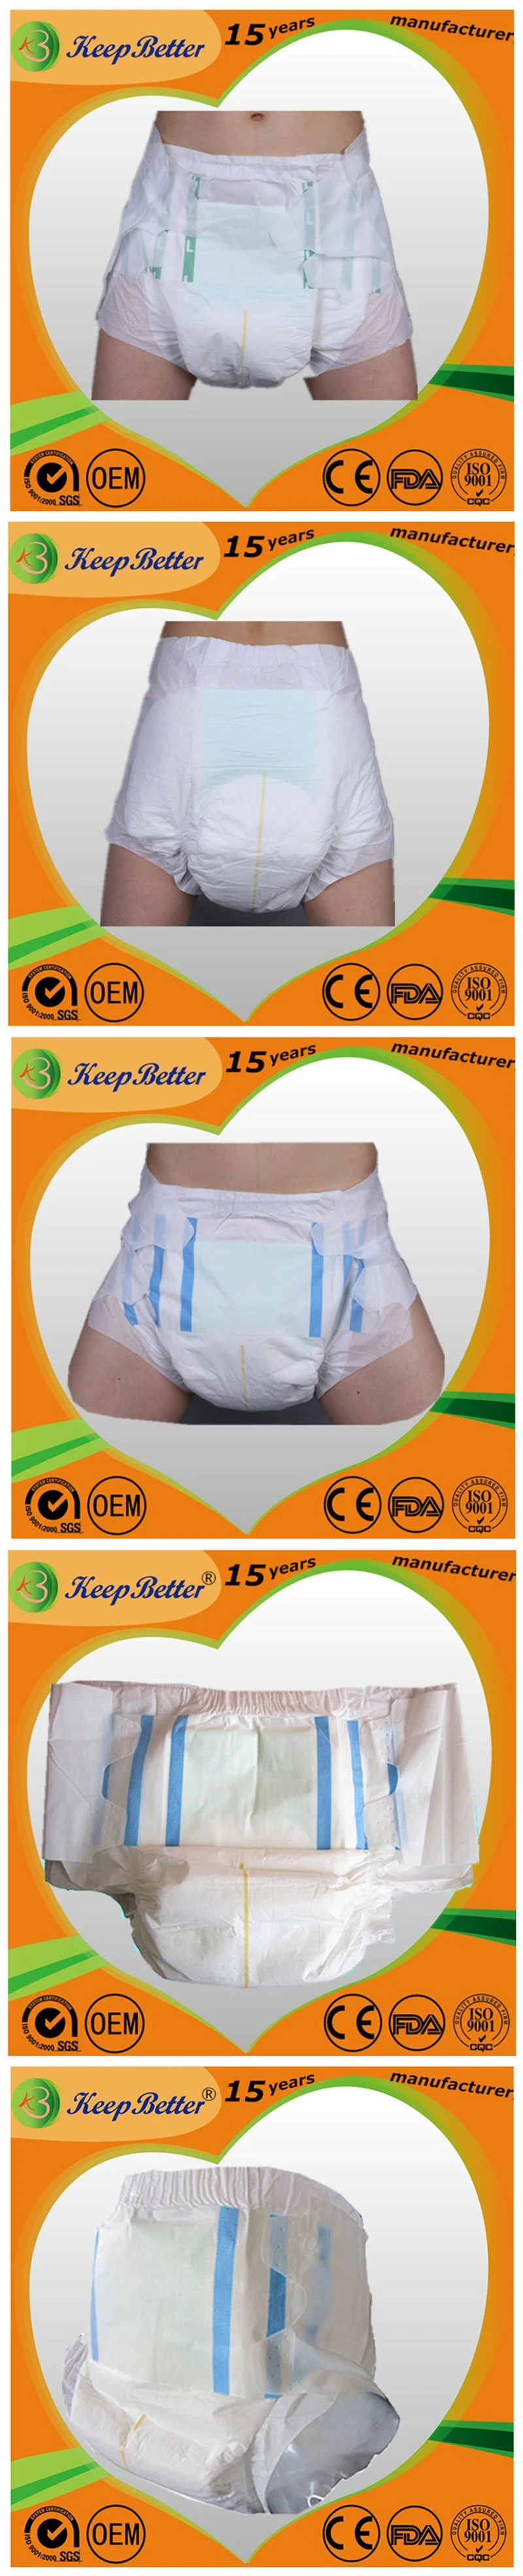 Wetness Indicator Disposable Adult Diapers Overnight Use Incontinence Diaper Briefs